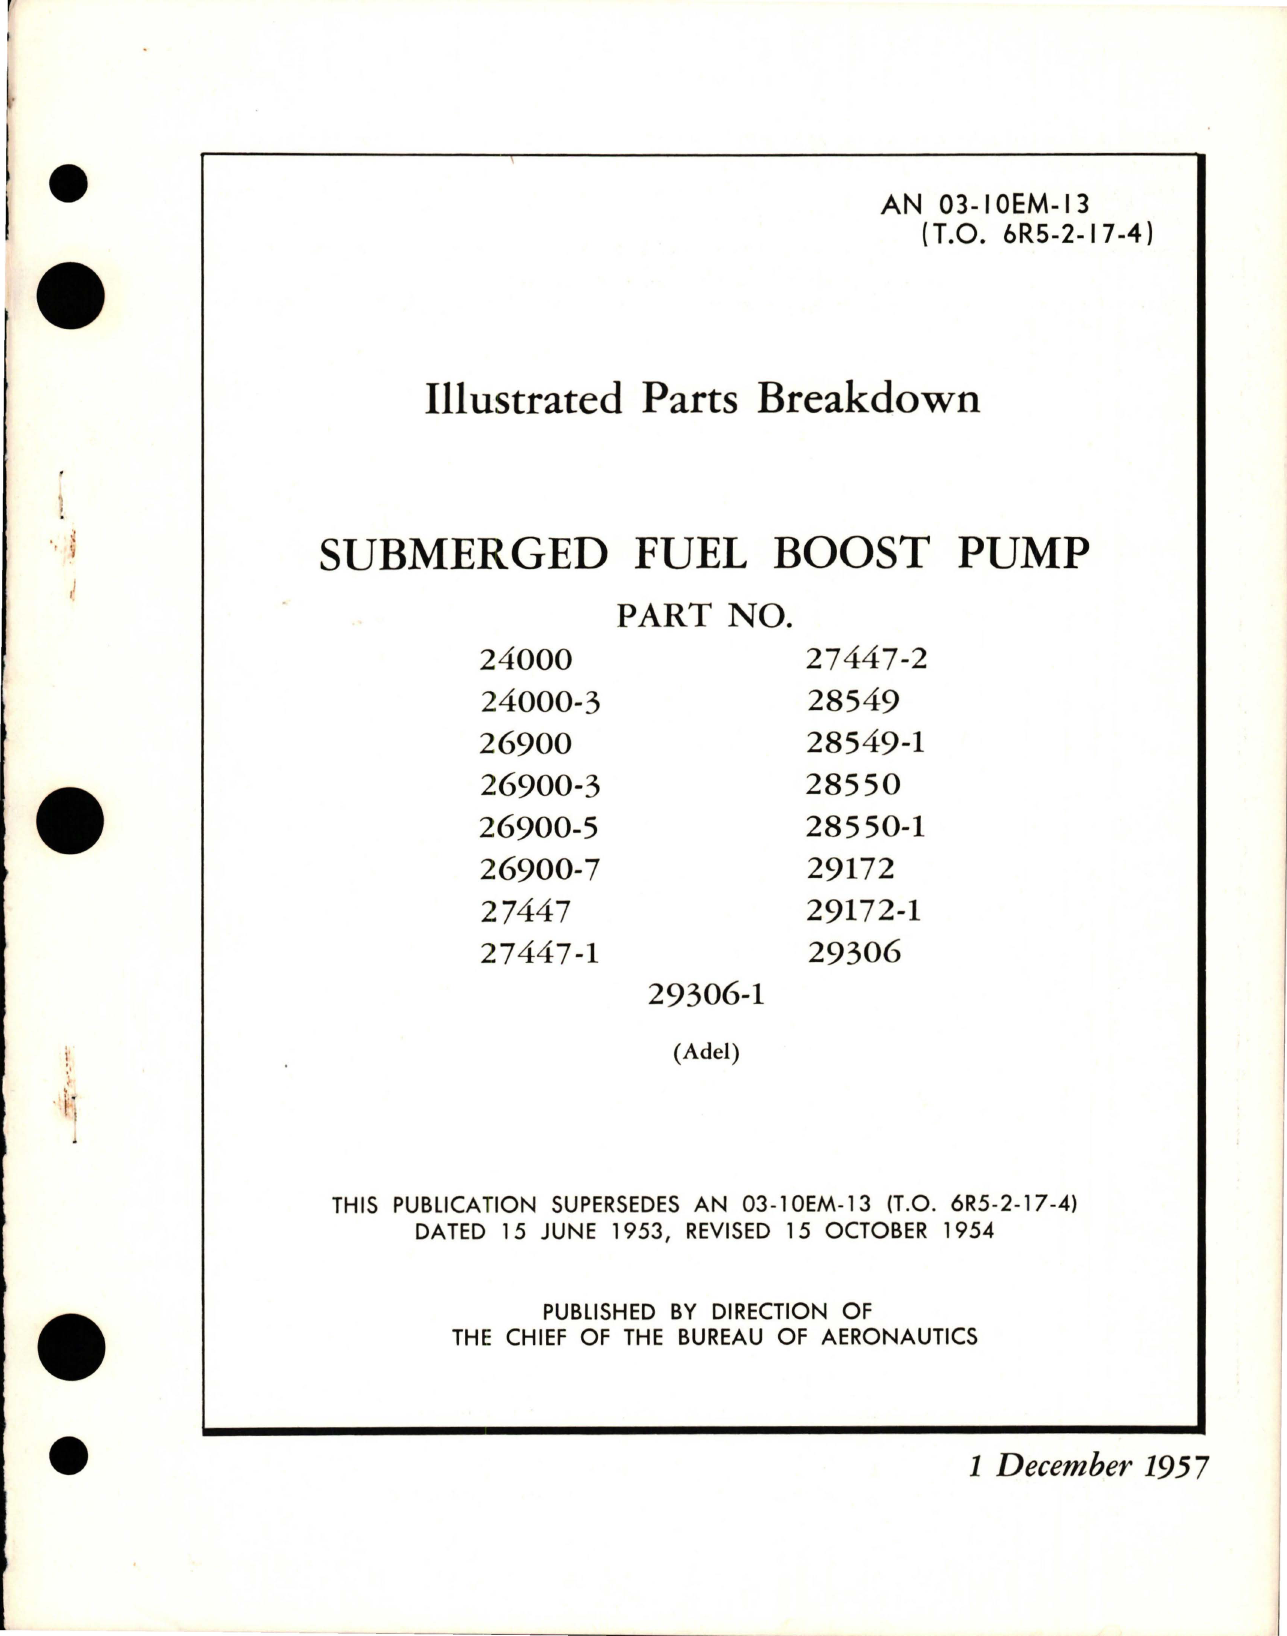 Sample page 1 from AirCorps Library document: Illustrated Parts Breakdown for Submerged Fuel Boost Pump